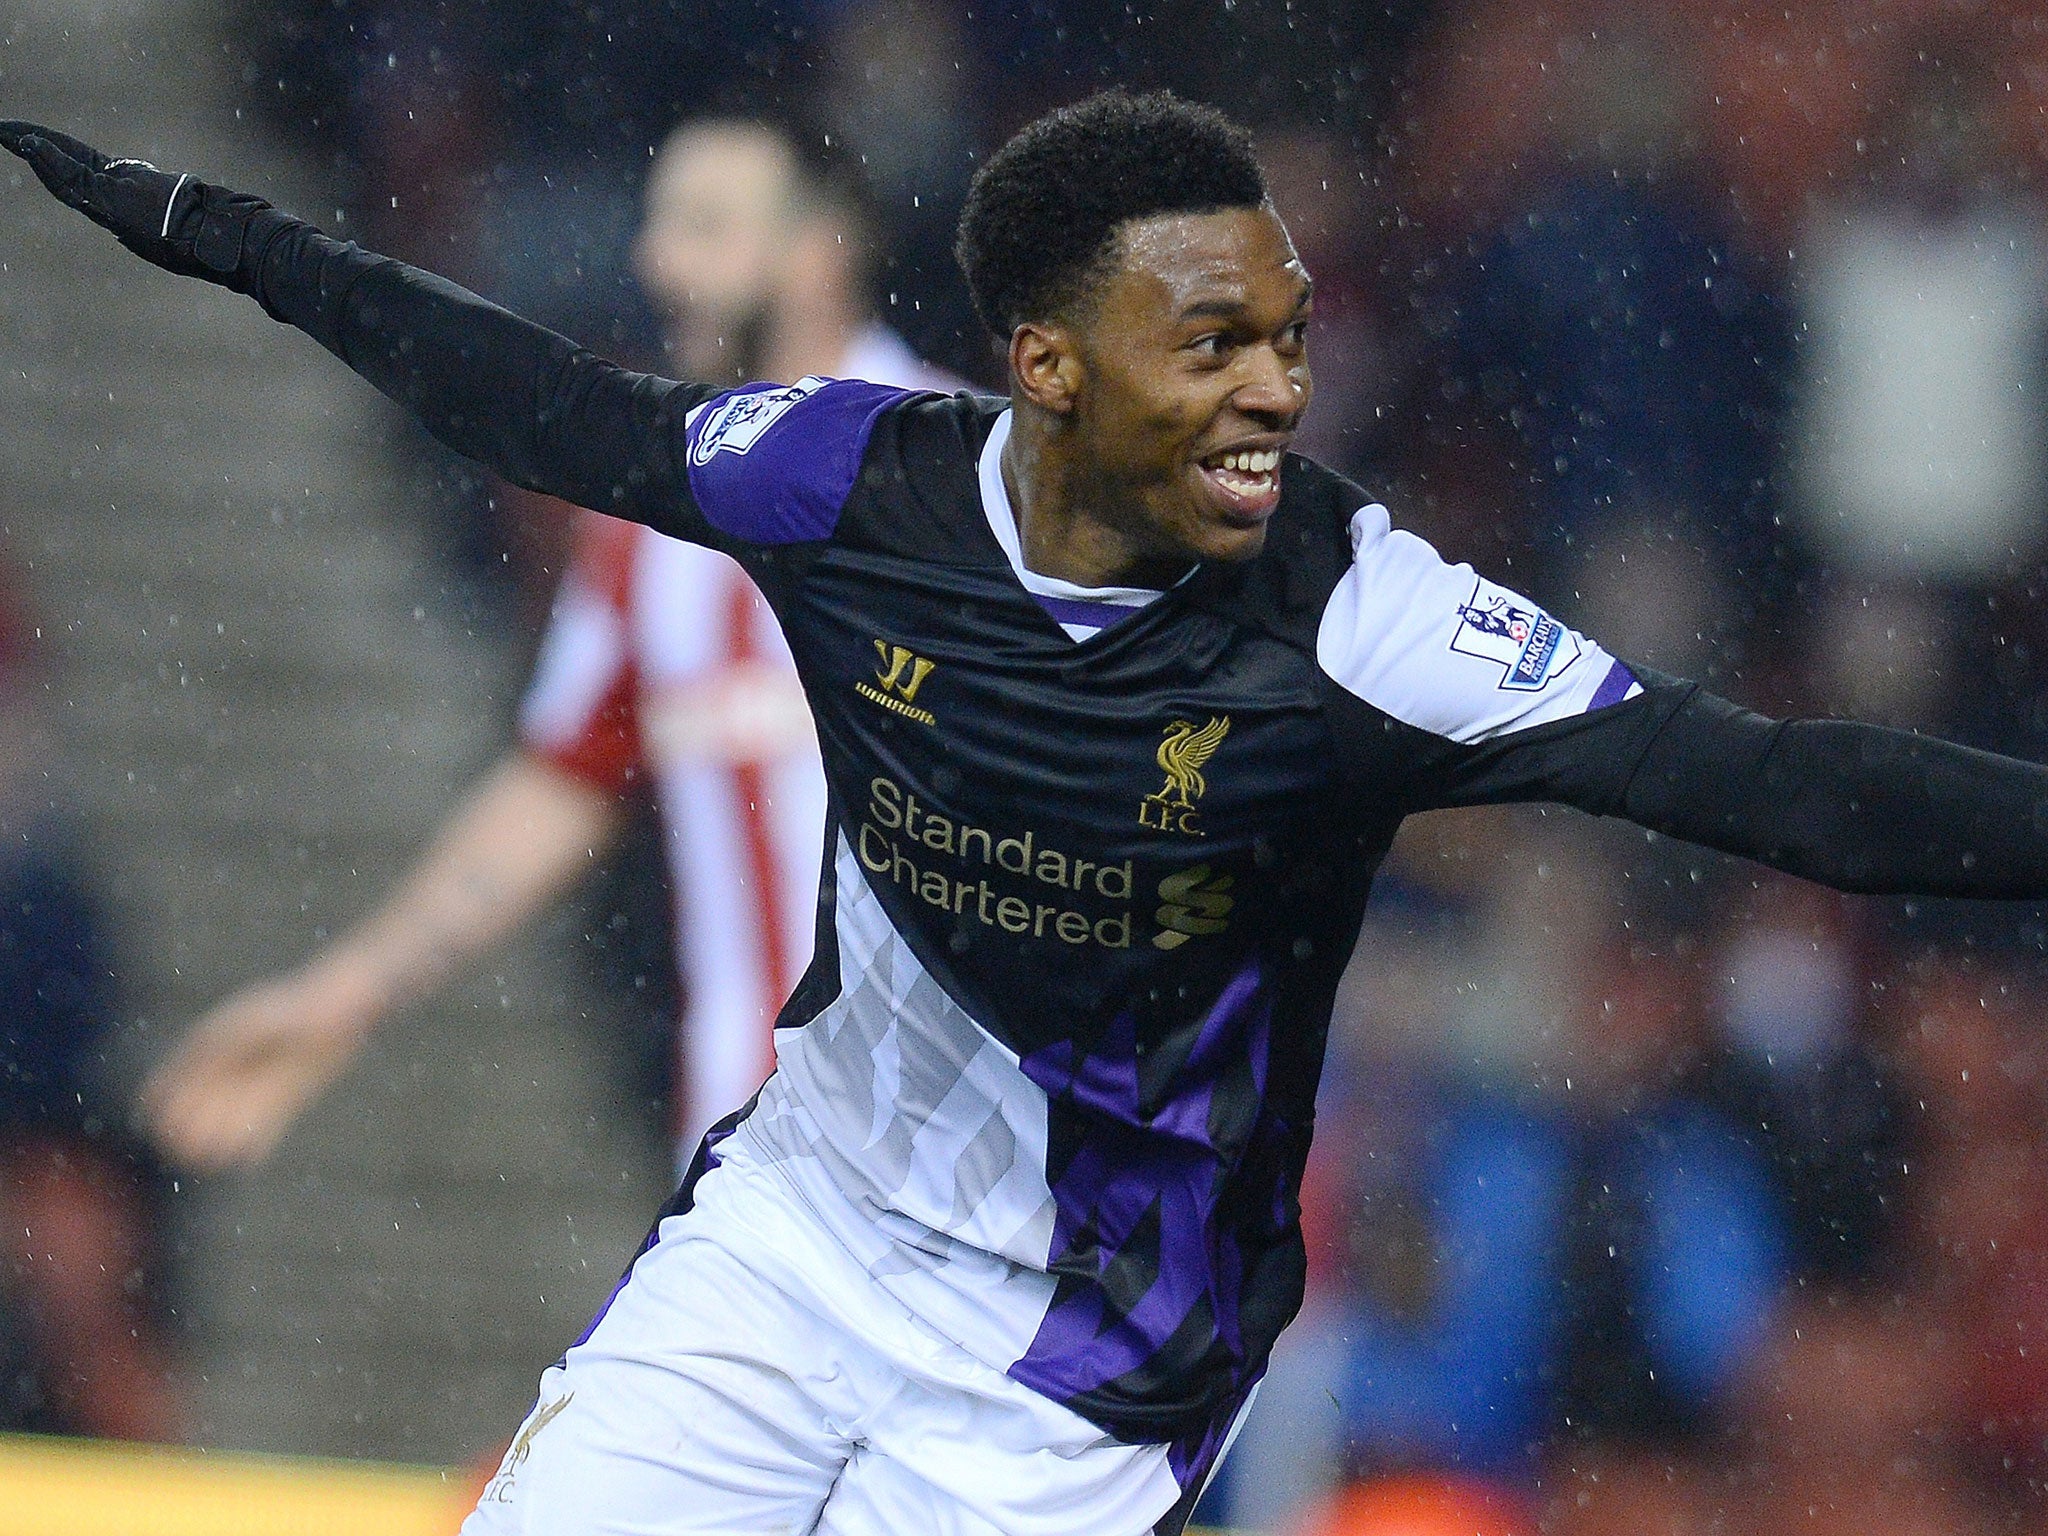 Liverpool striker Daniel Sturridge celebrates after scoring their fifth goal in the 5-3 victory over Stoke City